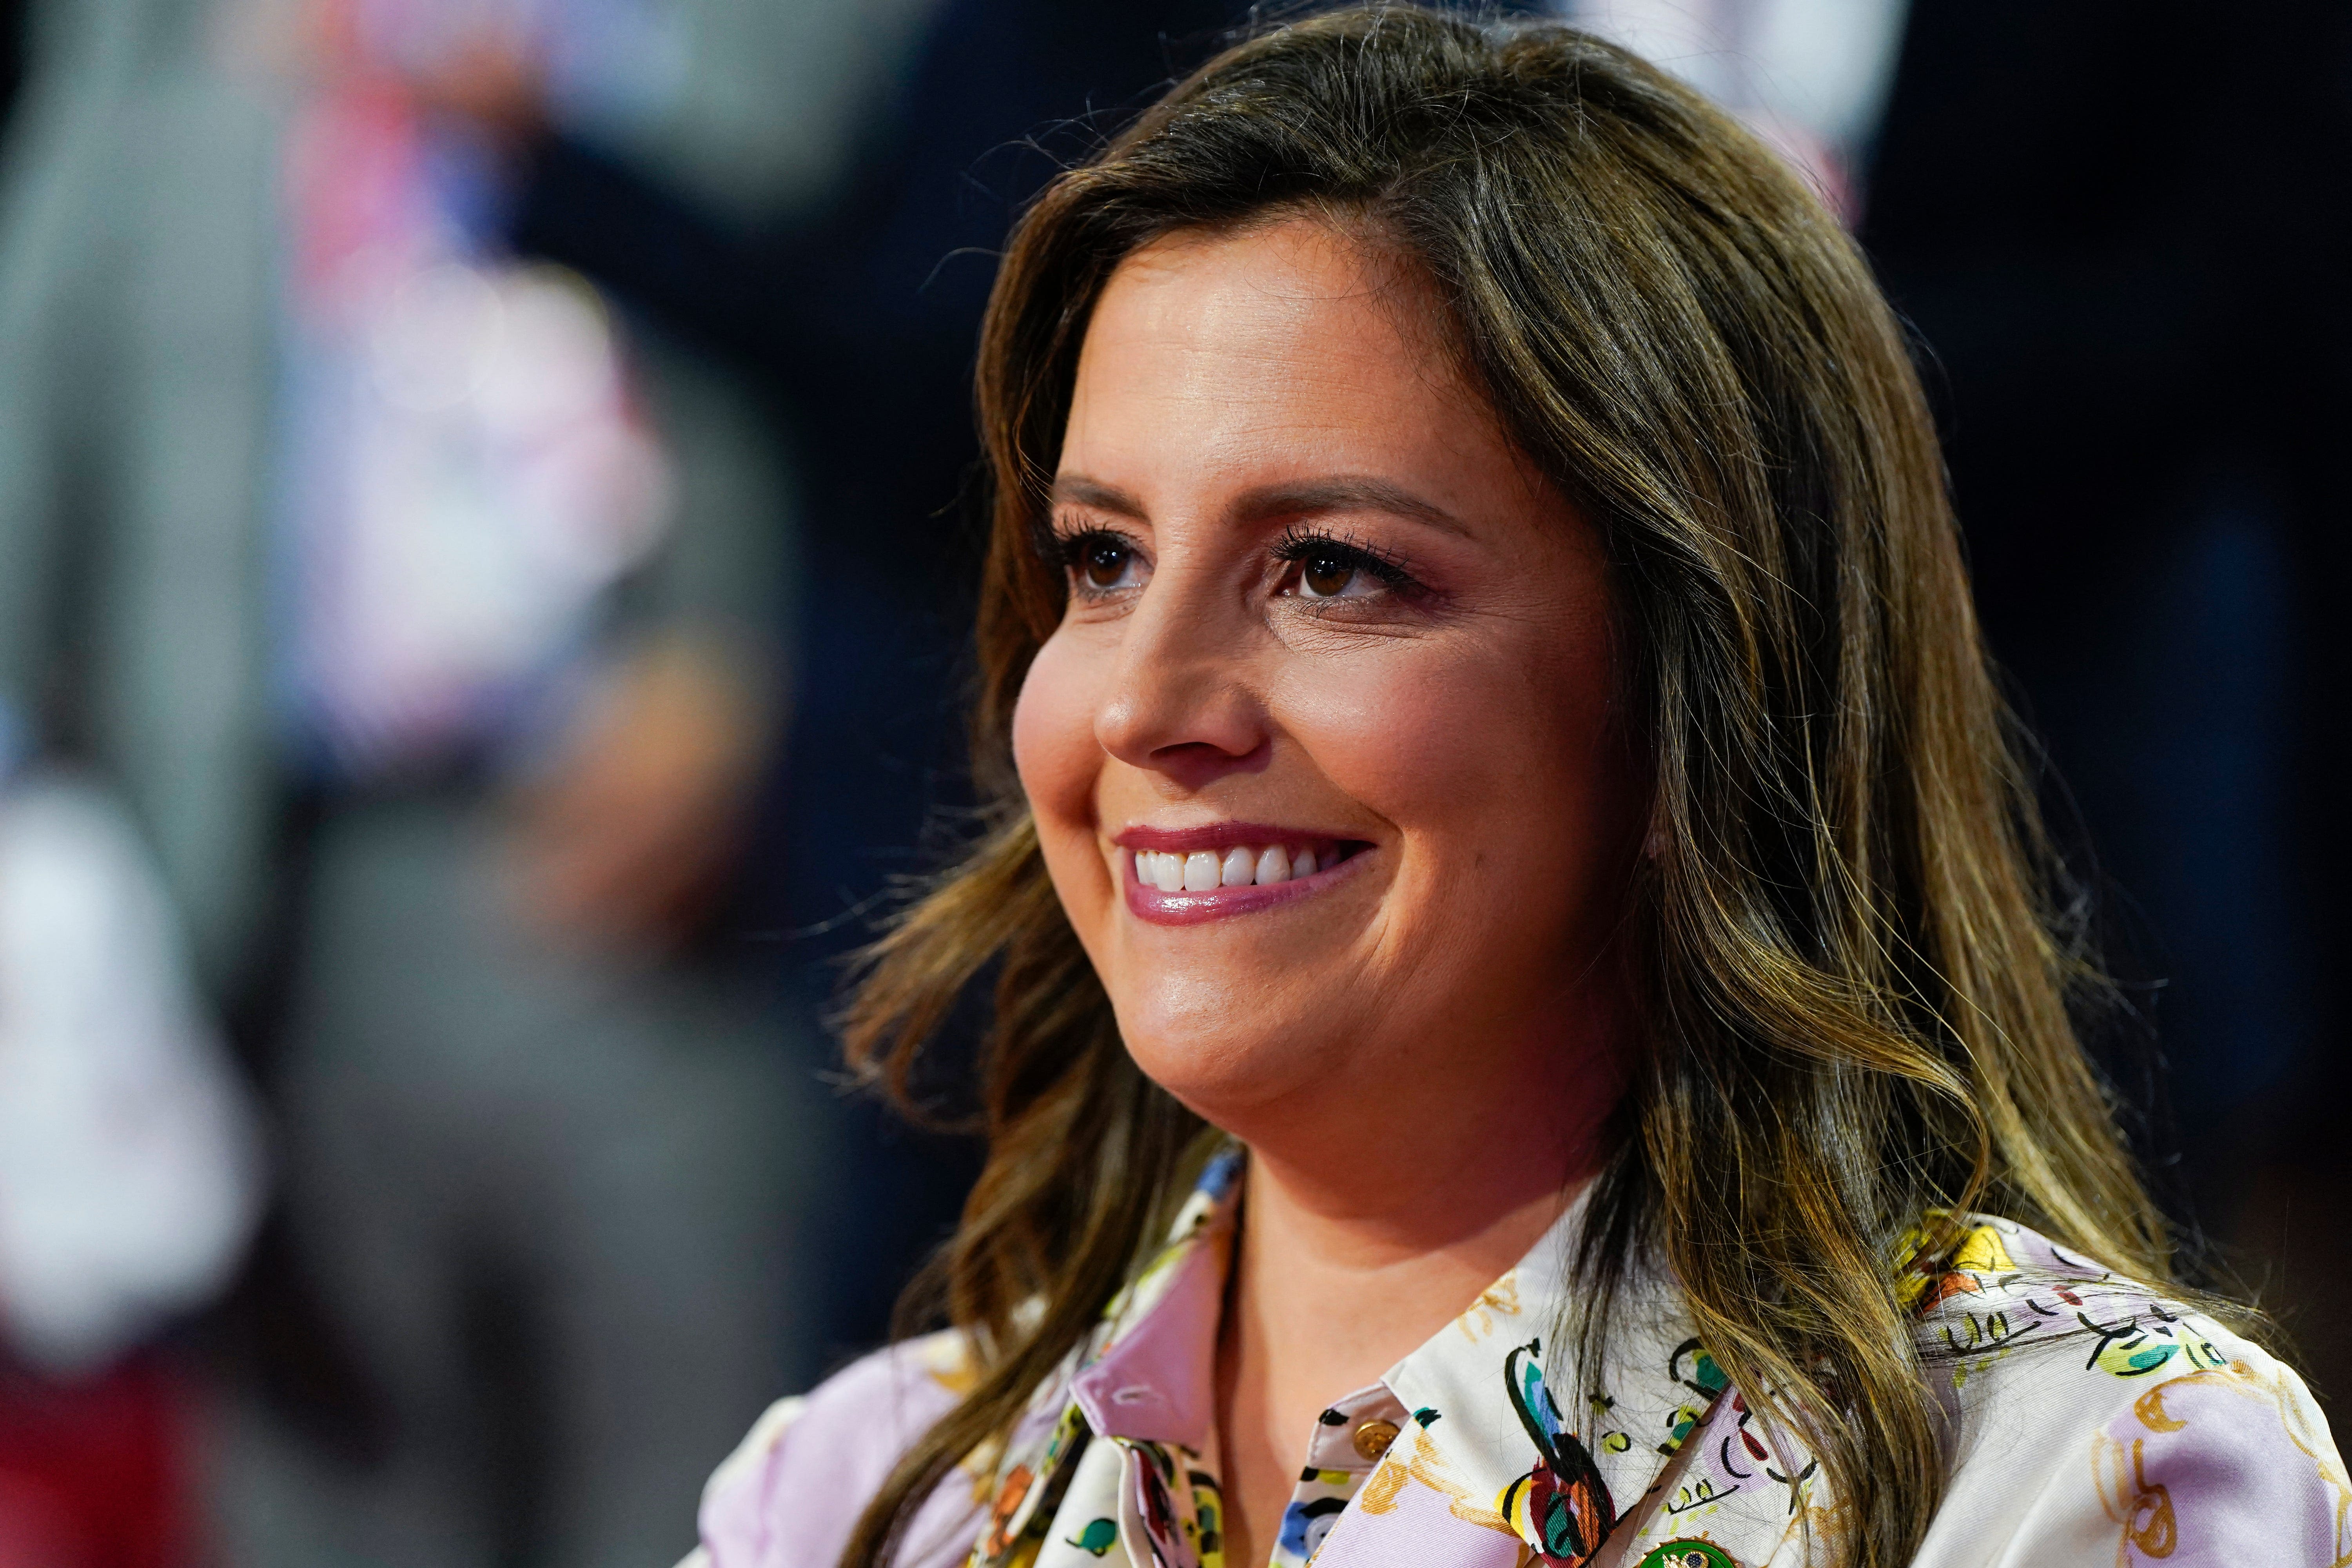 Watch NY House Rep. Elise Stefanik's speech at the Republican National Convention